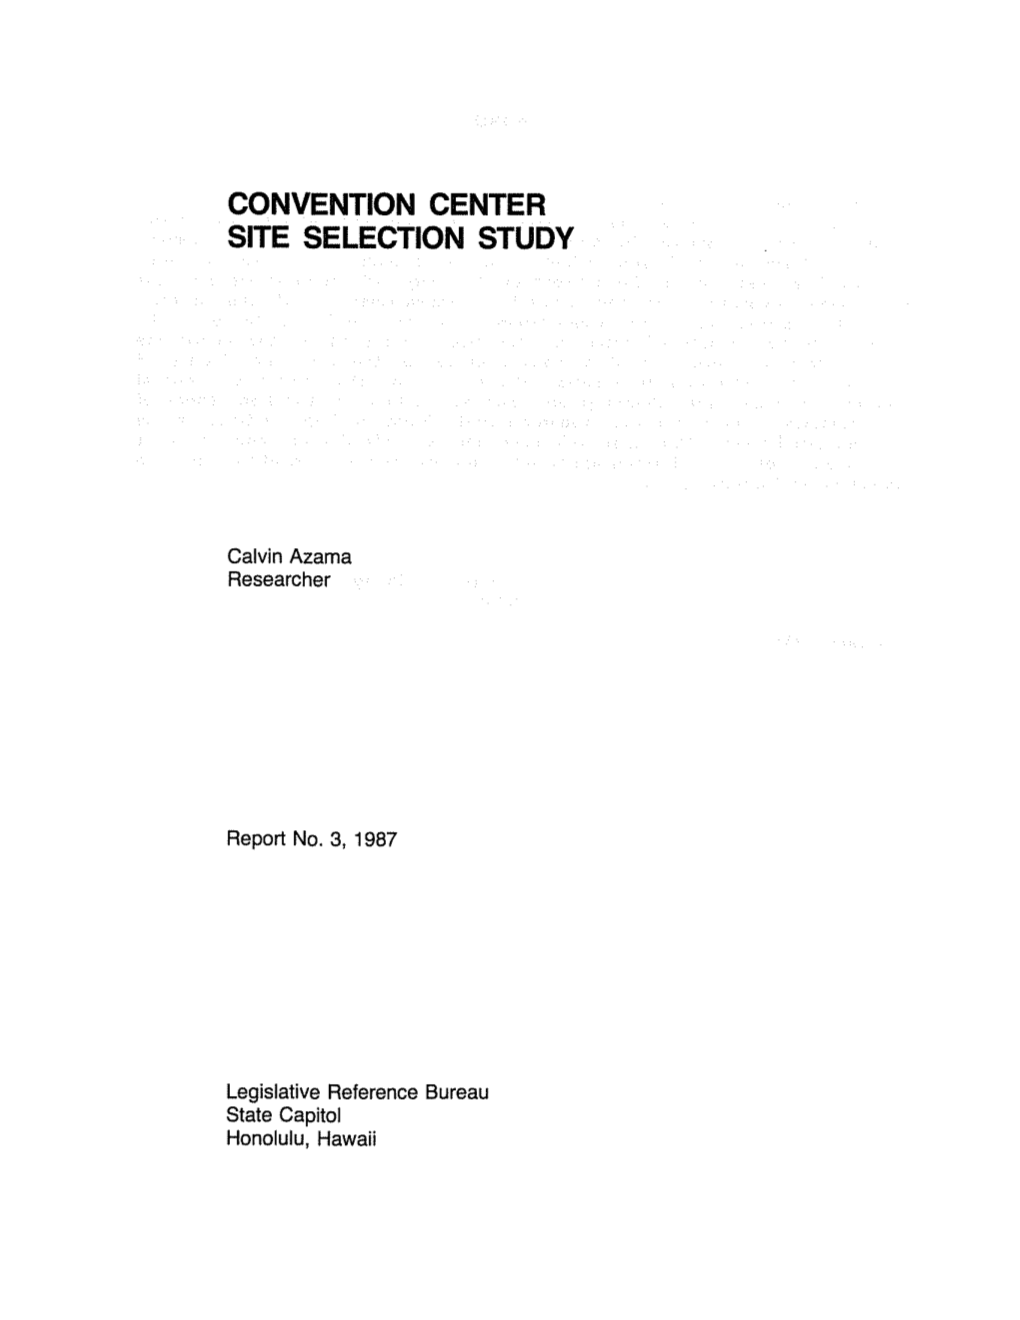 Convention Center Site Selection Study